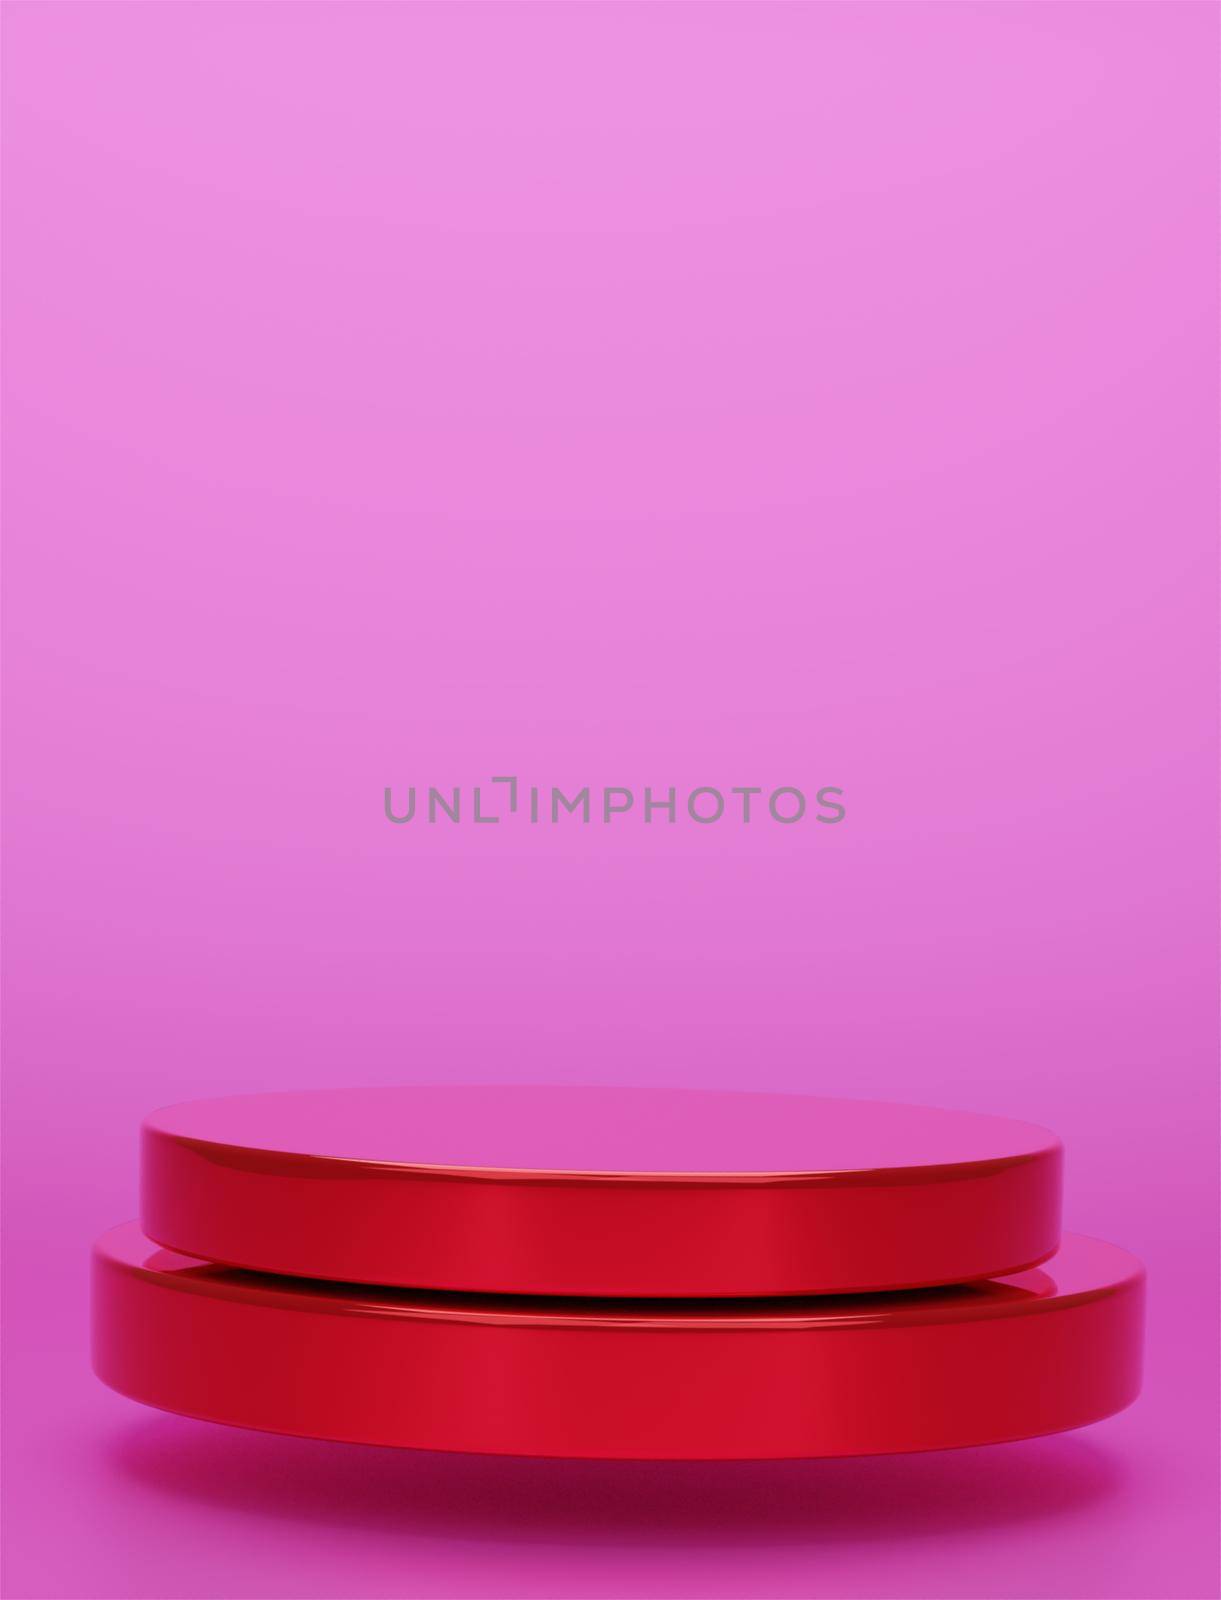 Red geometric circular background vertical image display podium prototype simple podium and commercial product concept pink background 3d rendering by noppha80